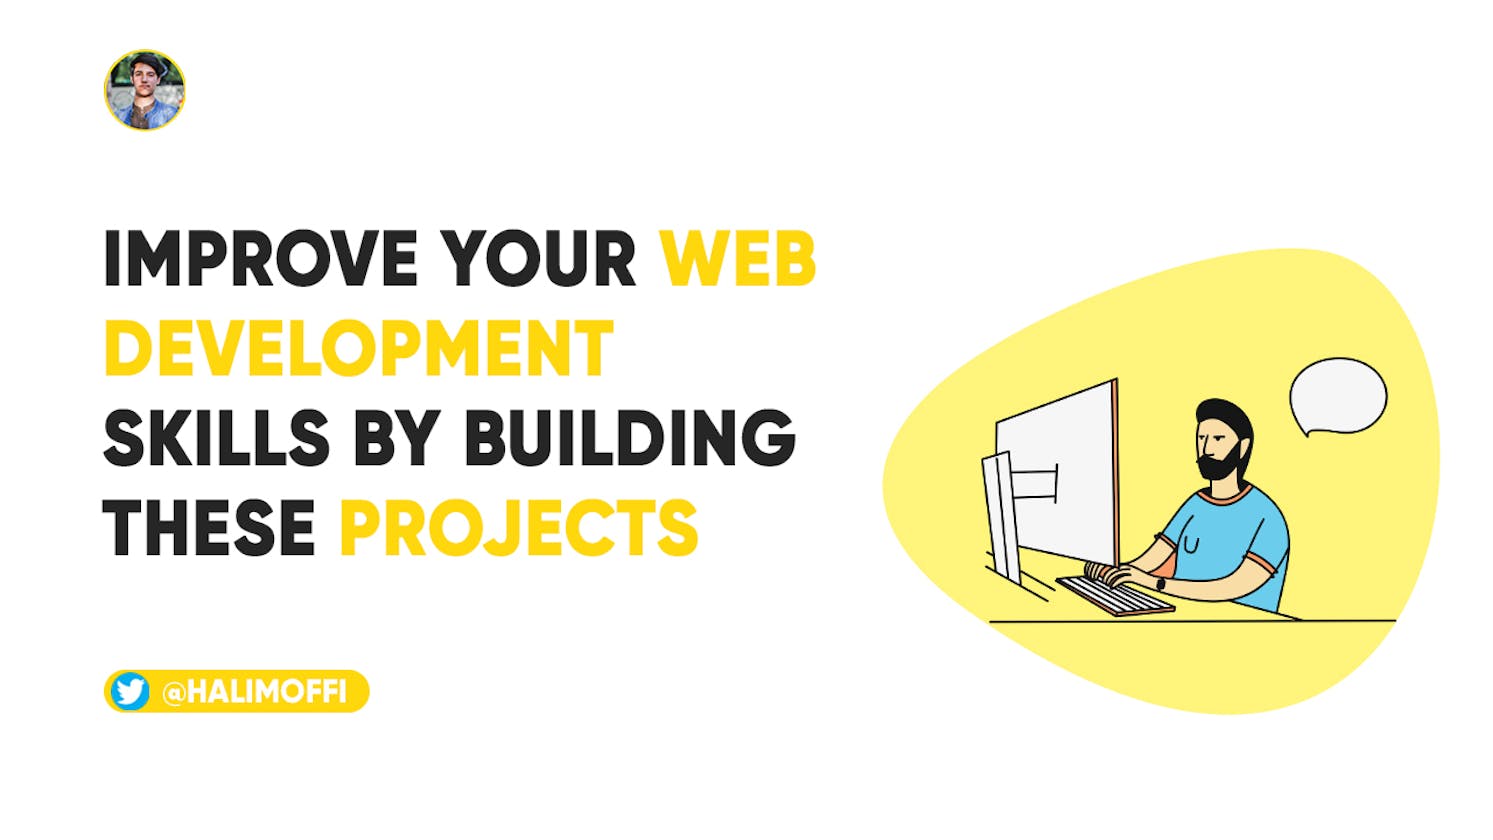 Improve Your Web Development Skills by Building these Beginner-friendly Projects